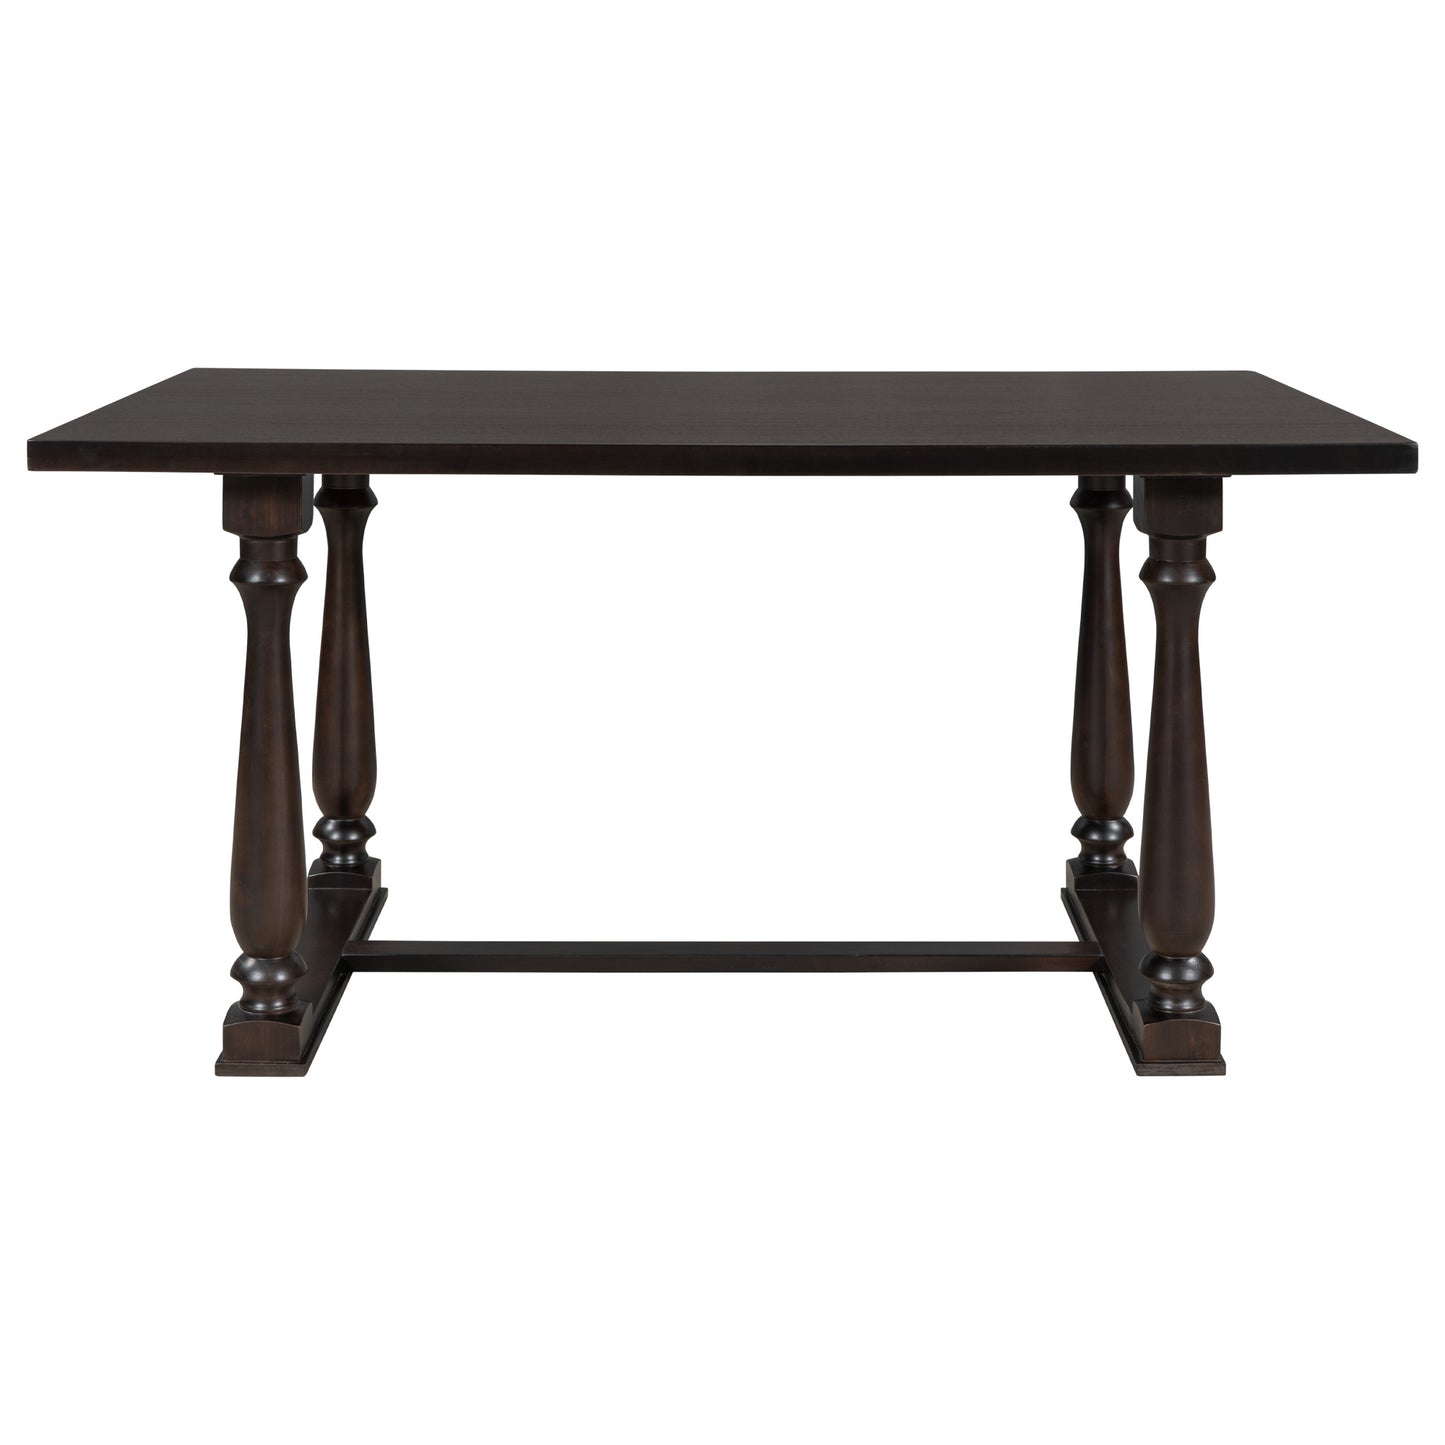 upholstered 6-piece dining table set